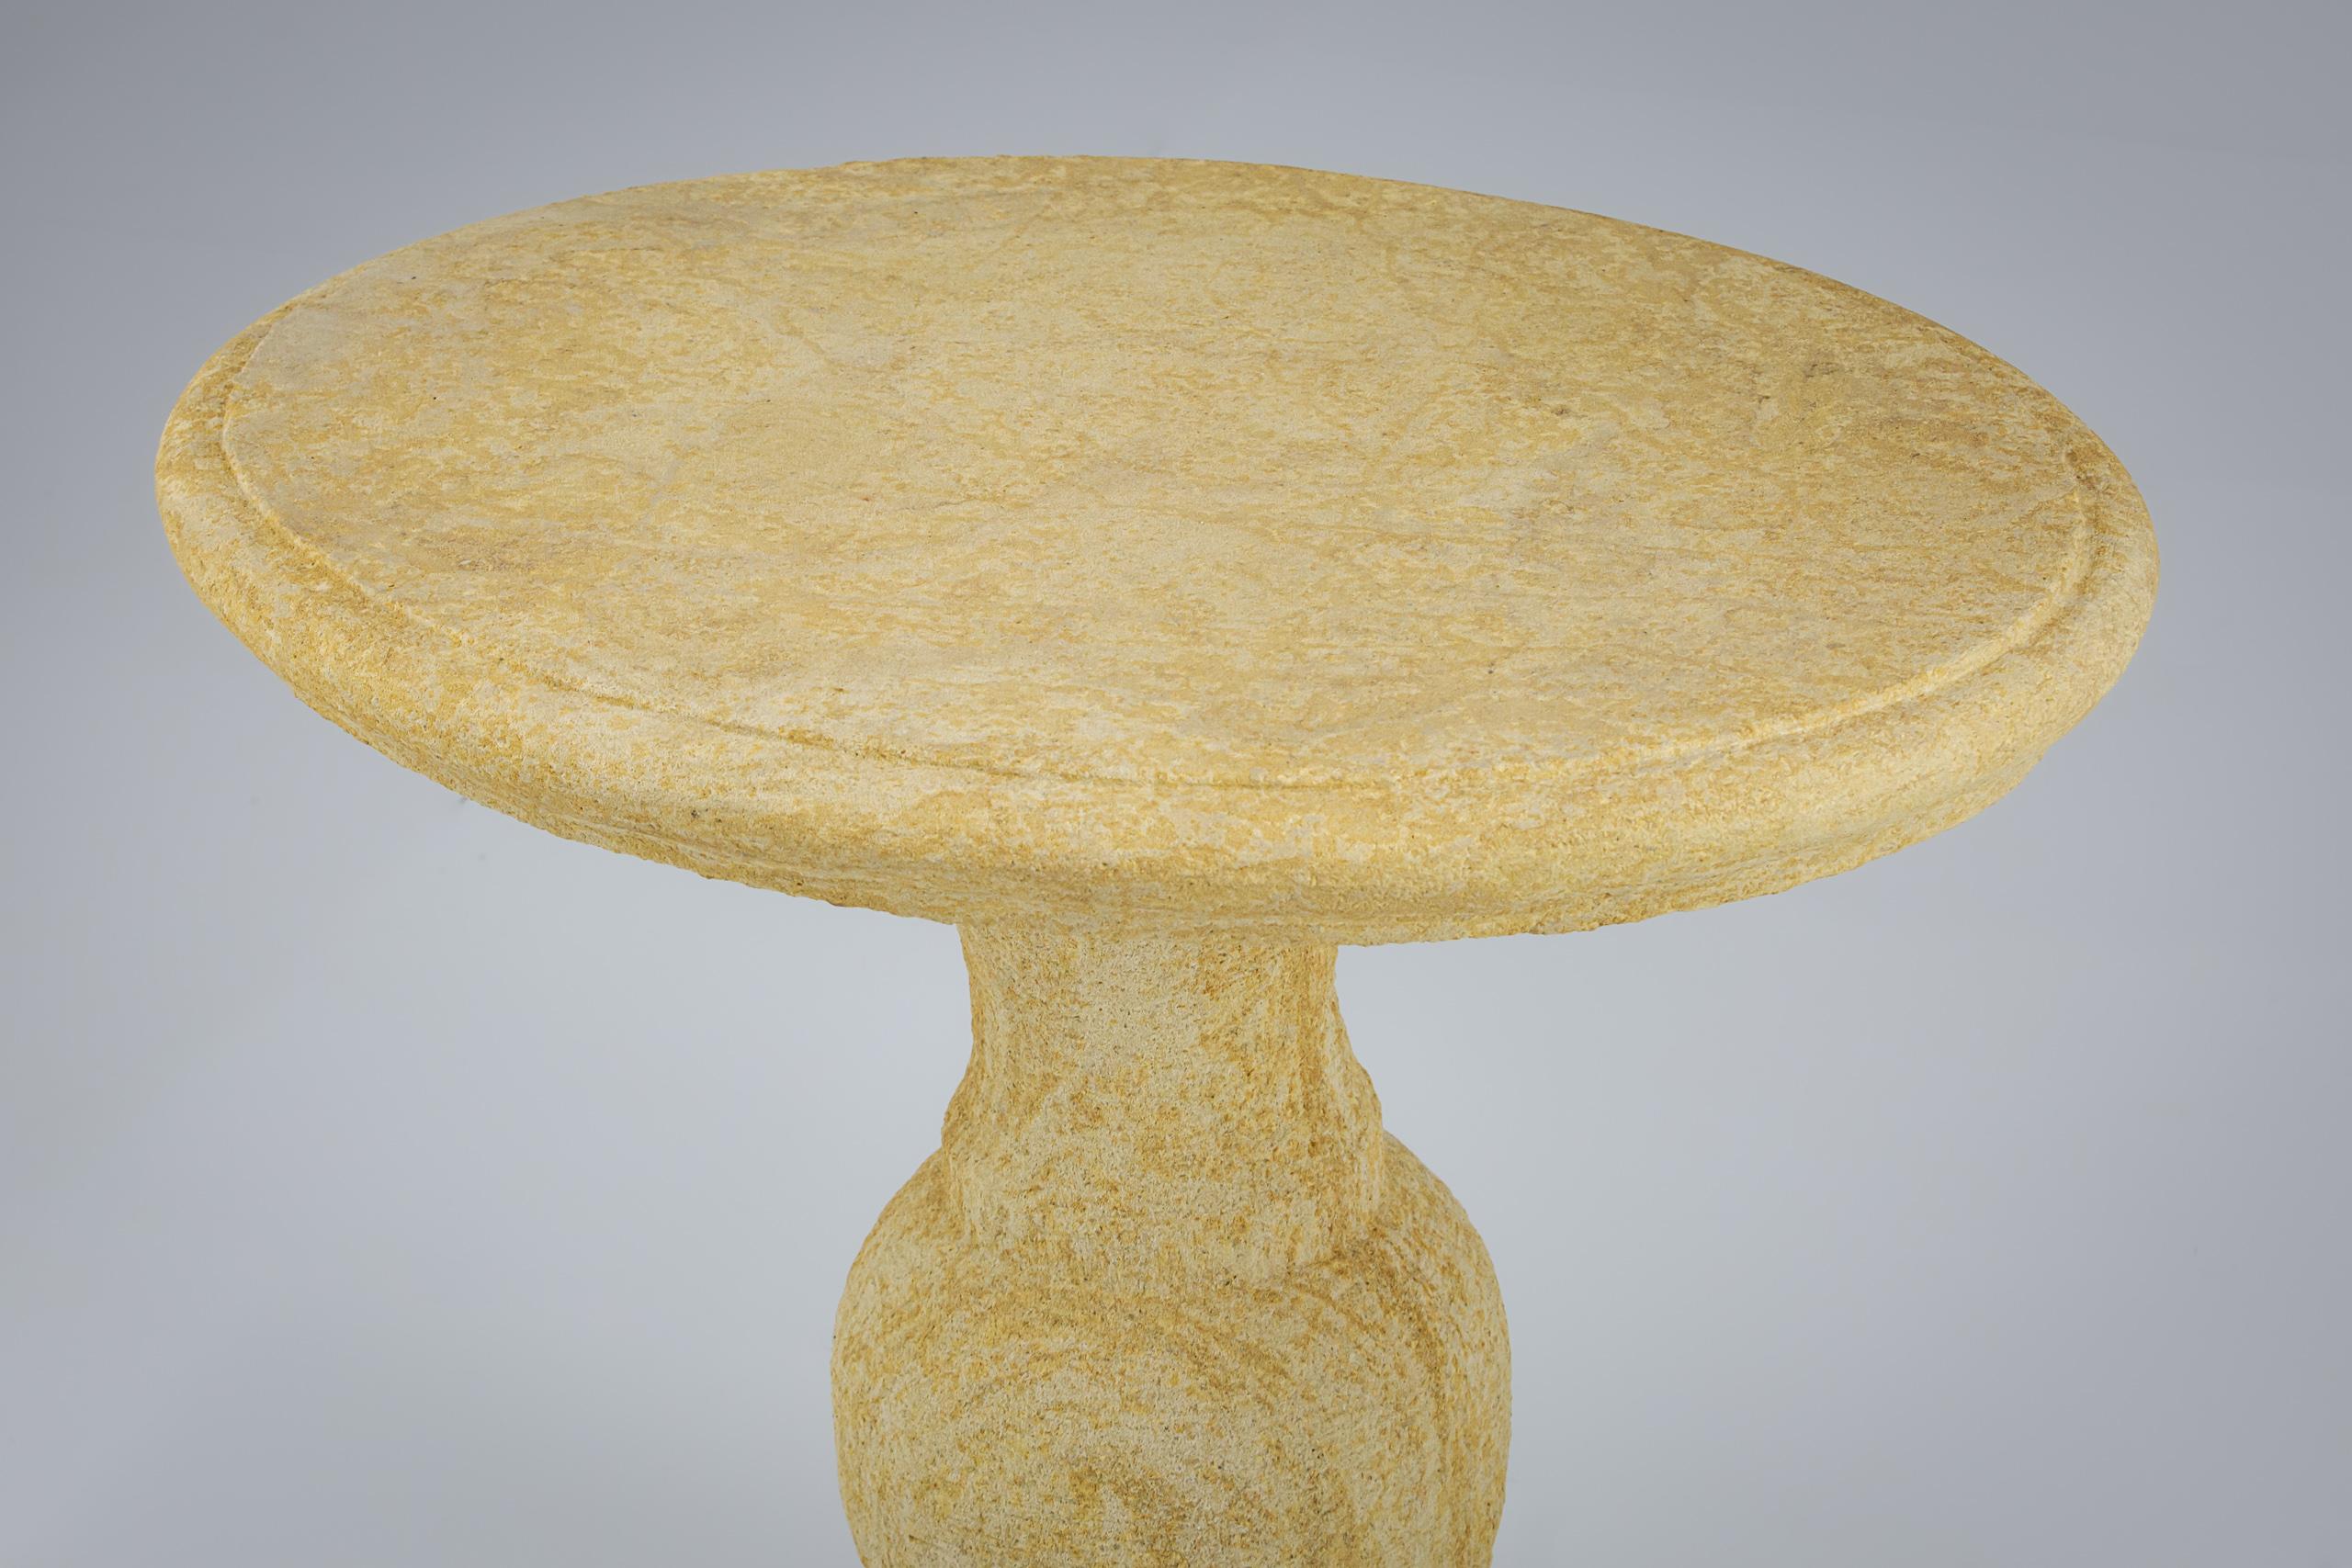 Hand Carved Golden Cotswold Oolitic Limestone Table In Good Condition For Sale In Pease pottage, West Sussex